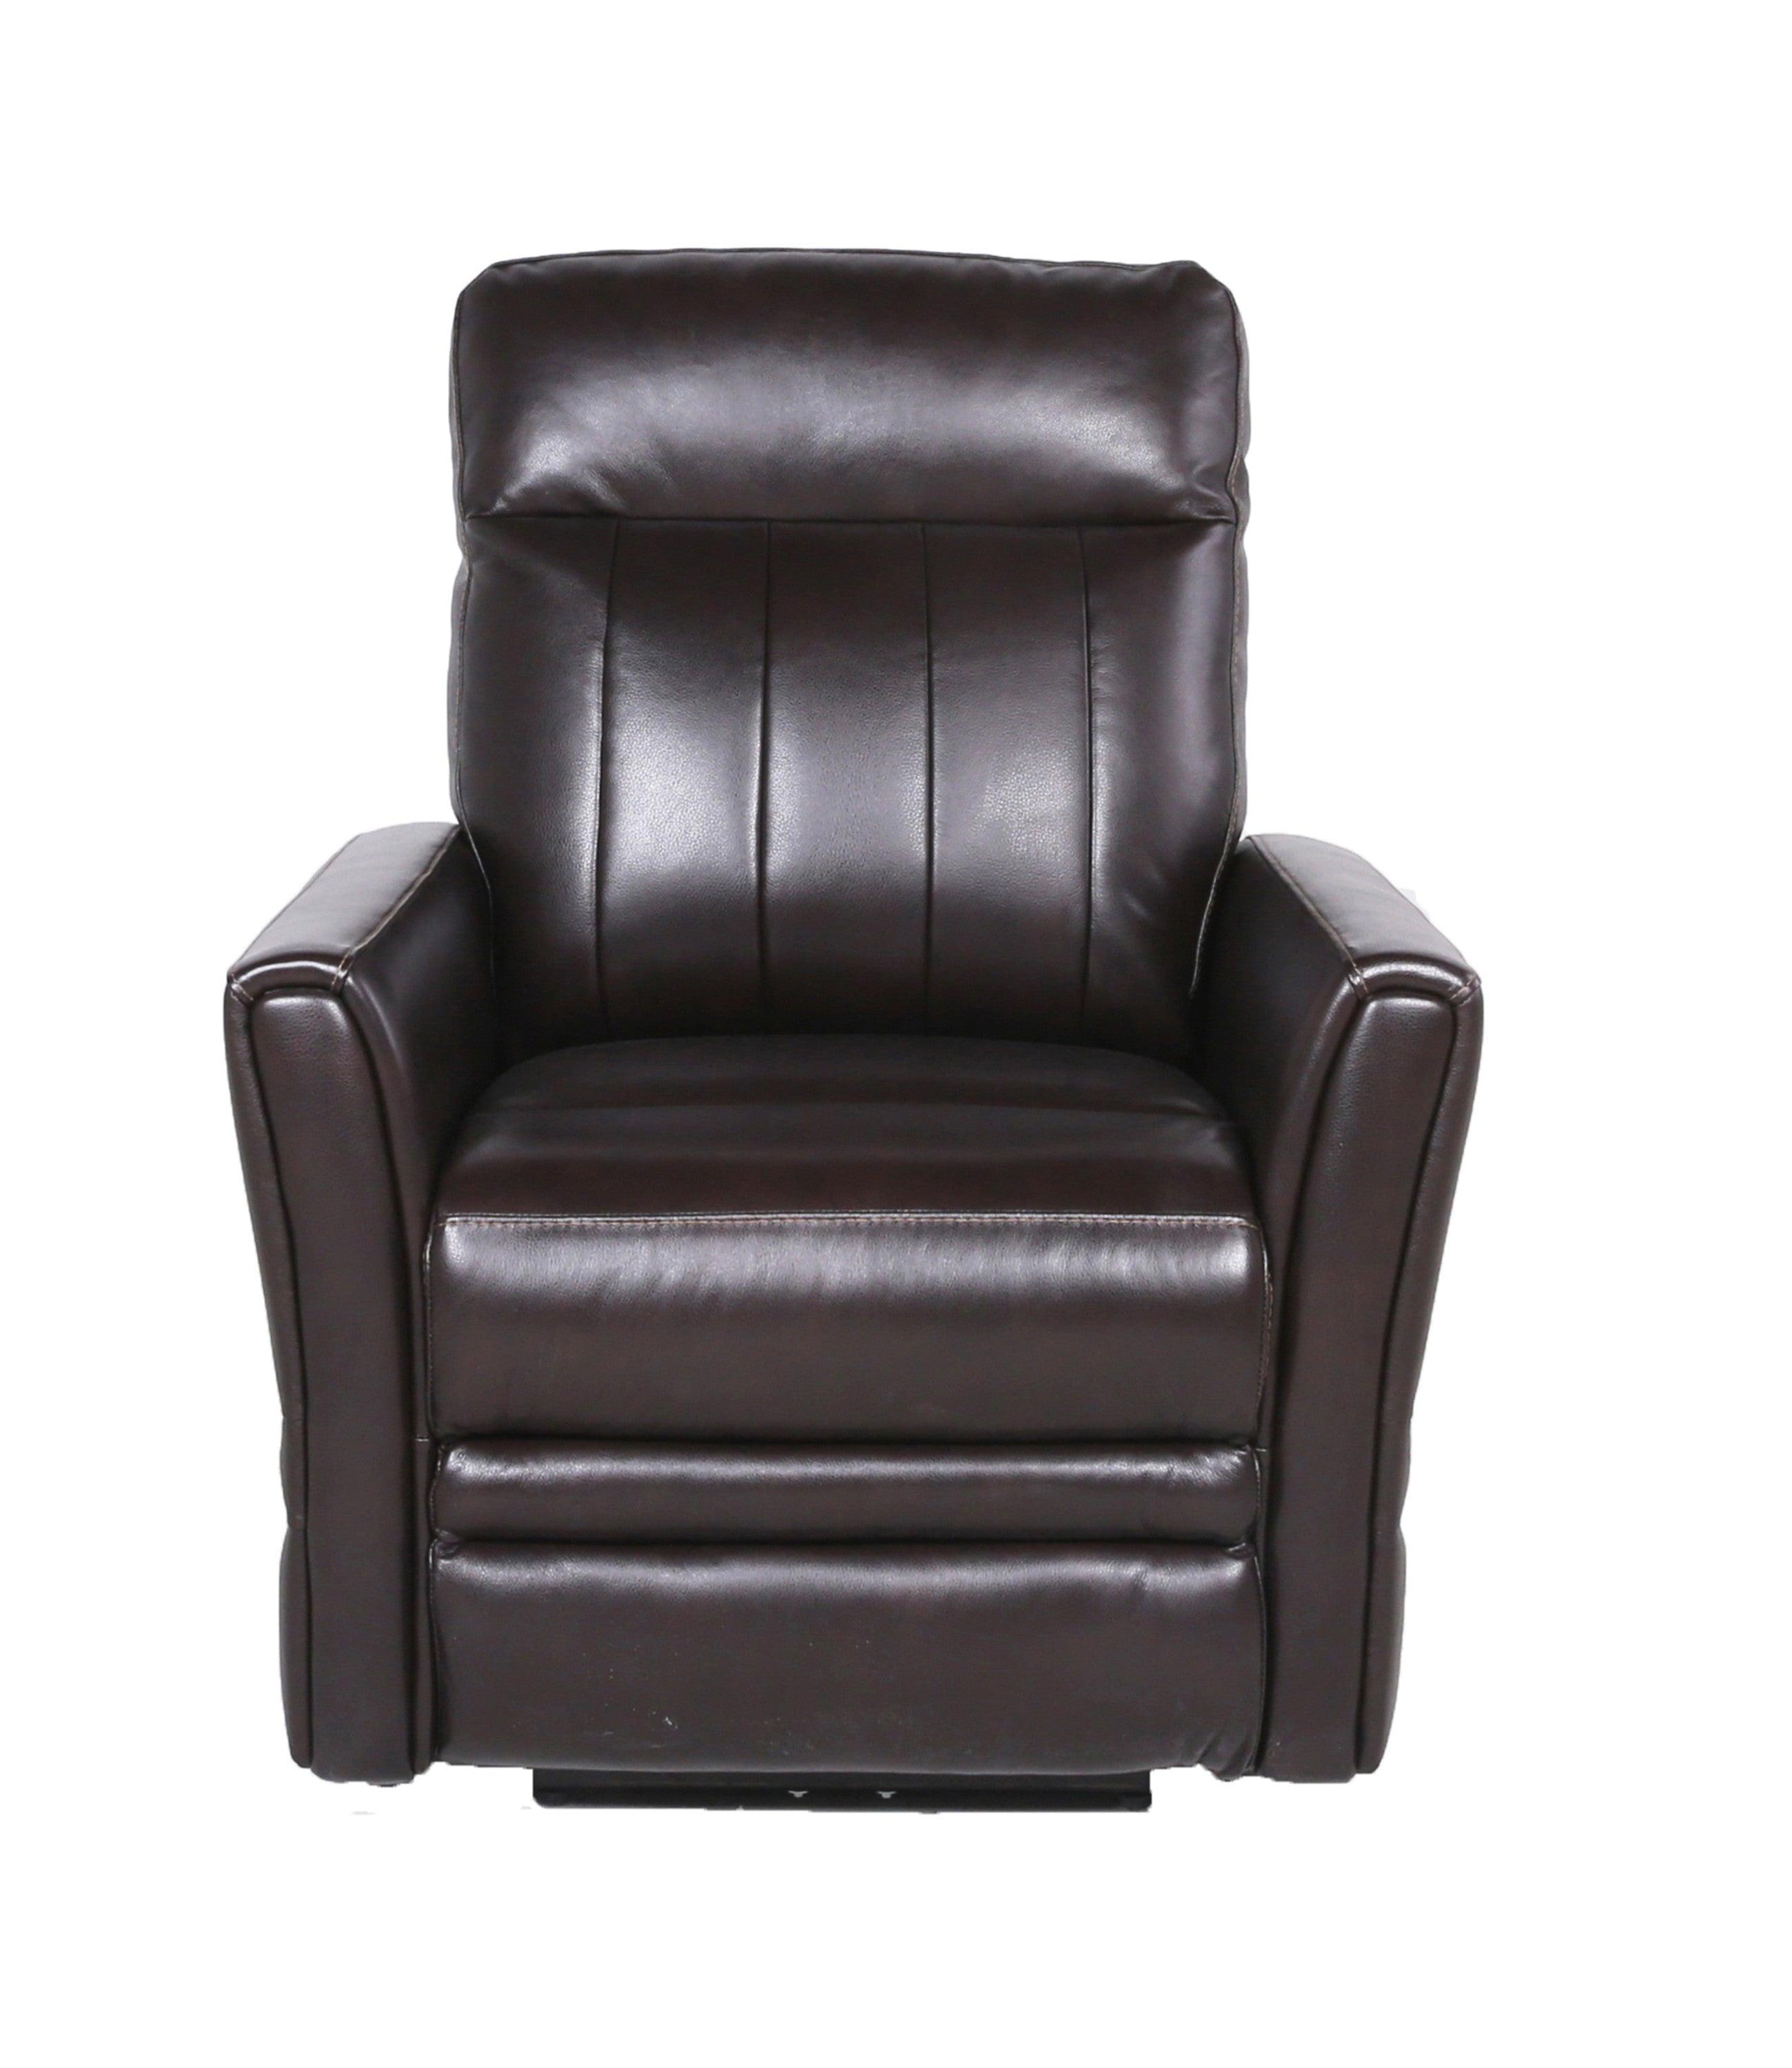 Coachella Transitional Brown Leather Recliner with Power Headrest